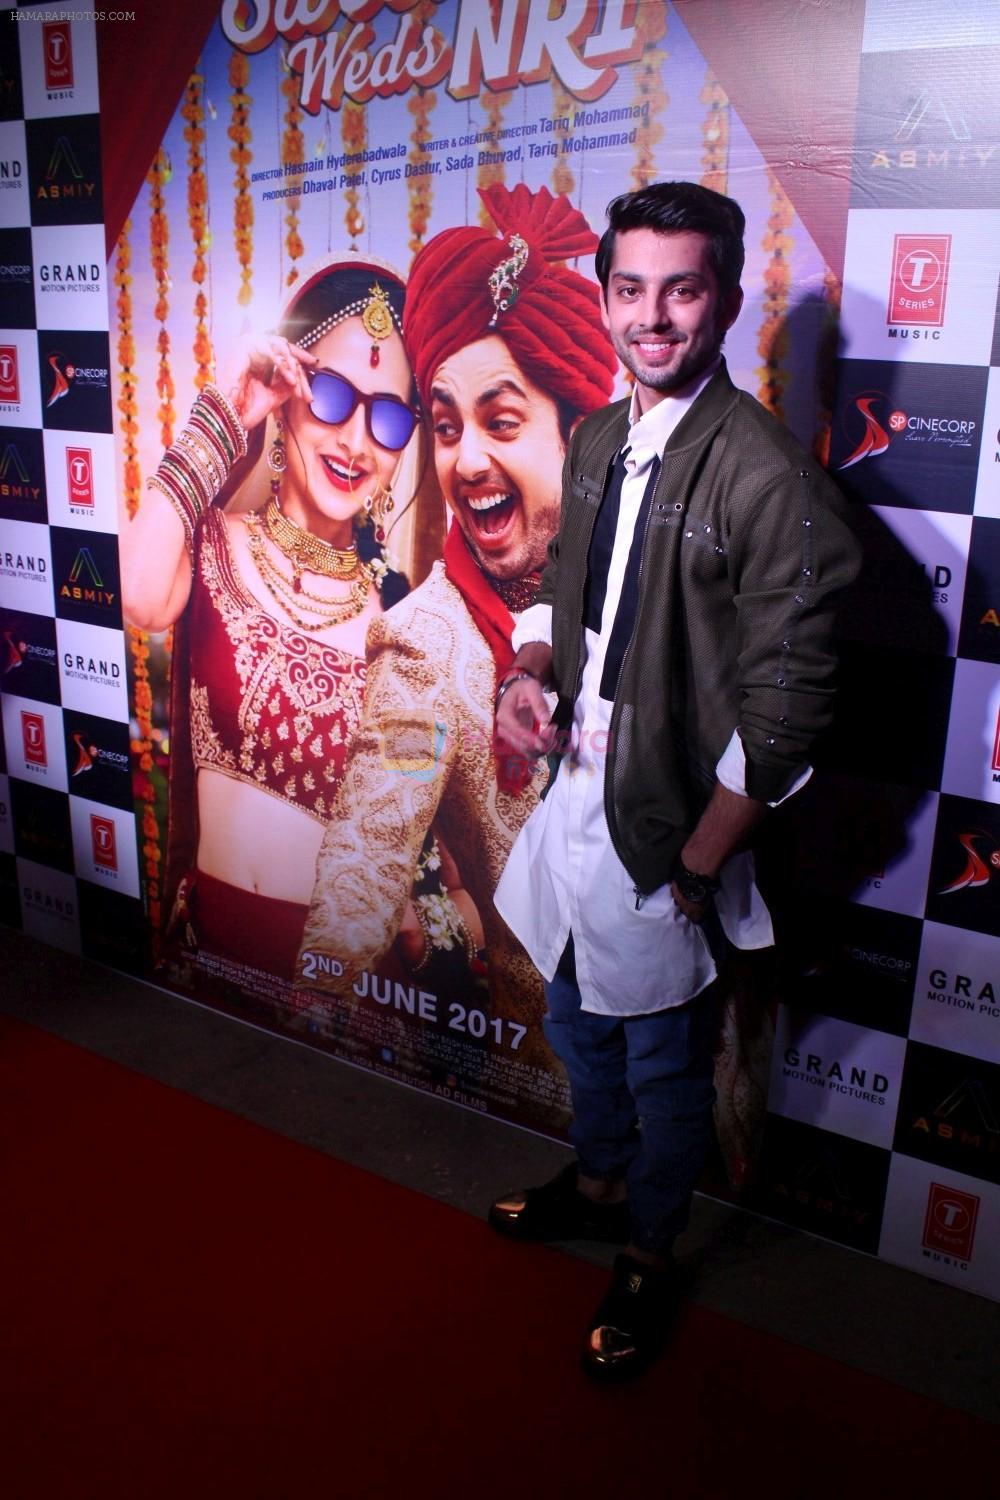 Himanshu Kohli at the Trailer Launch Of Sweetiee Weds NRI on 7th May 2017